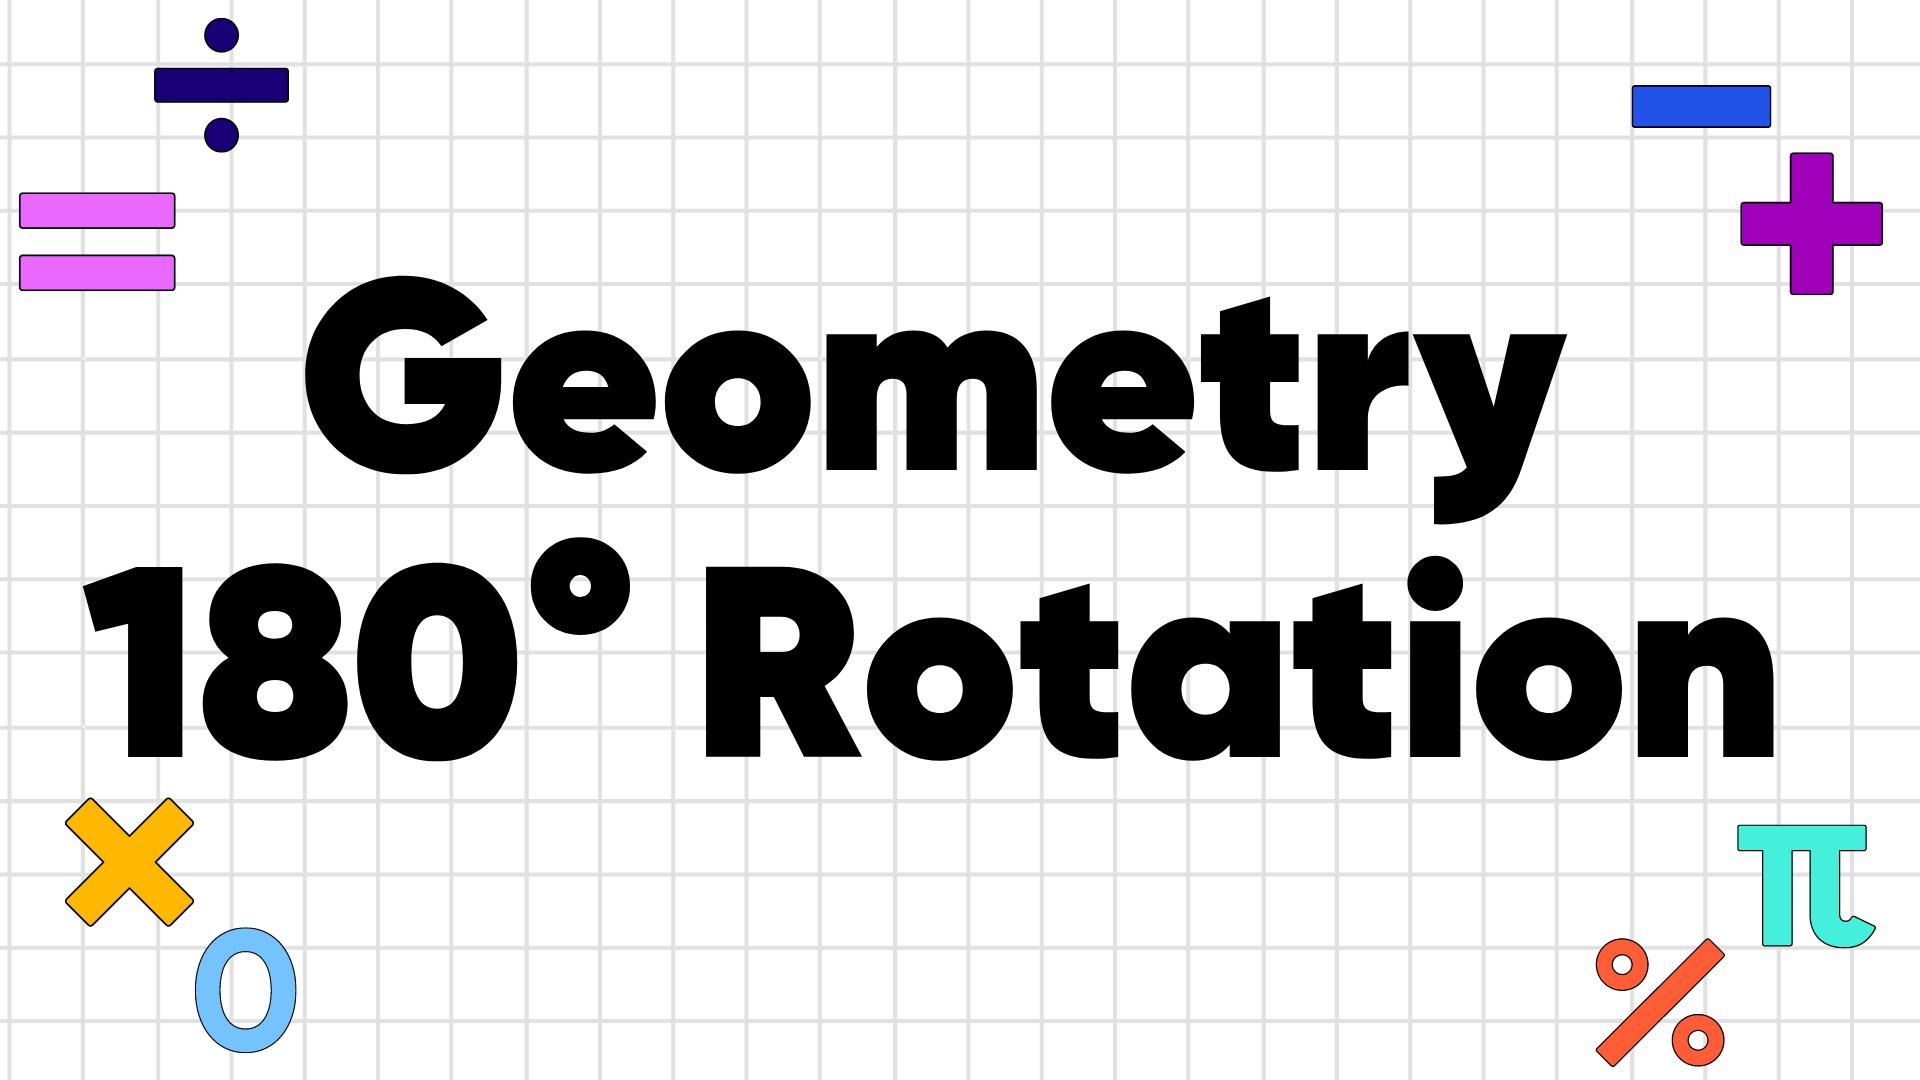 How to do a Rotation of a Figure 180 Degrees